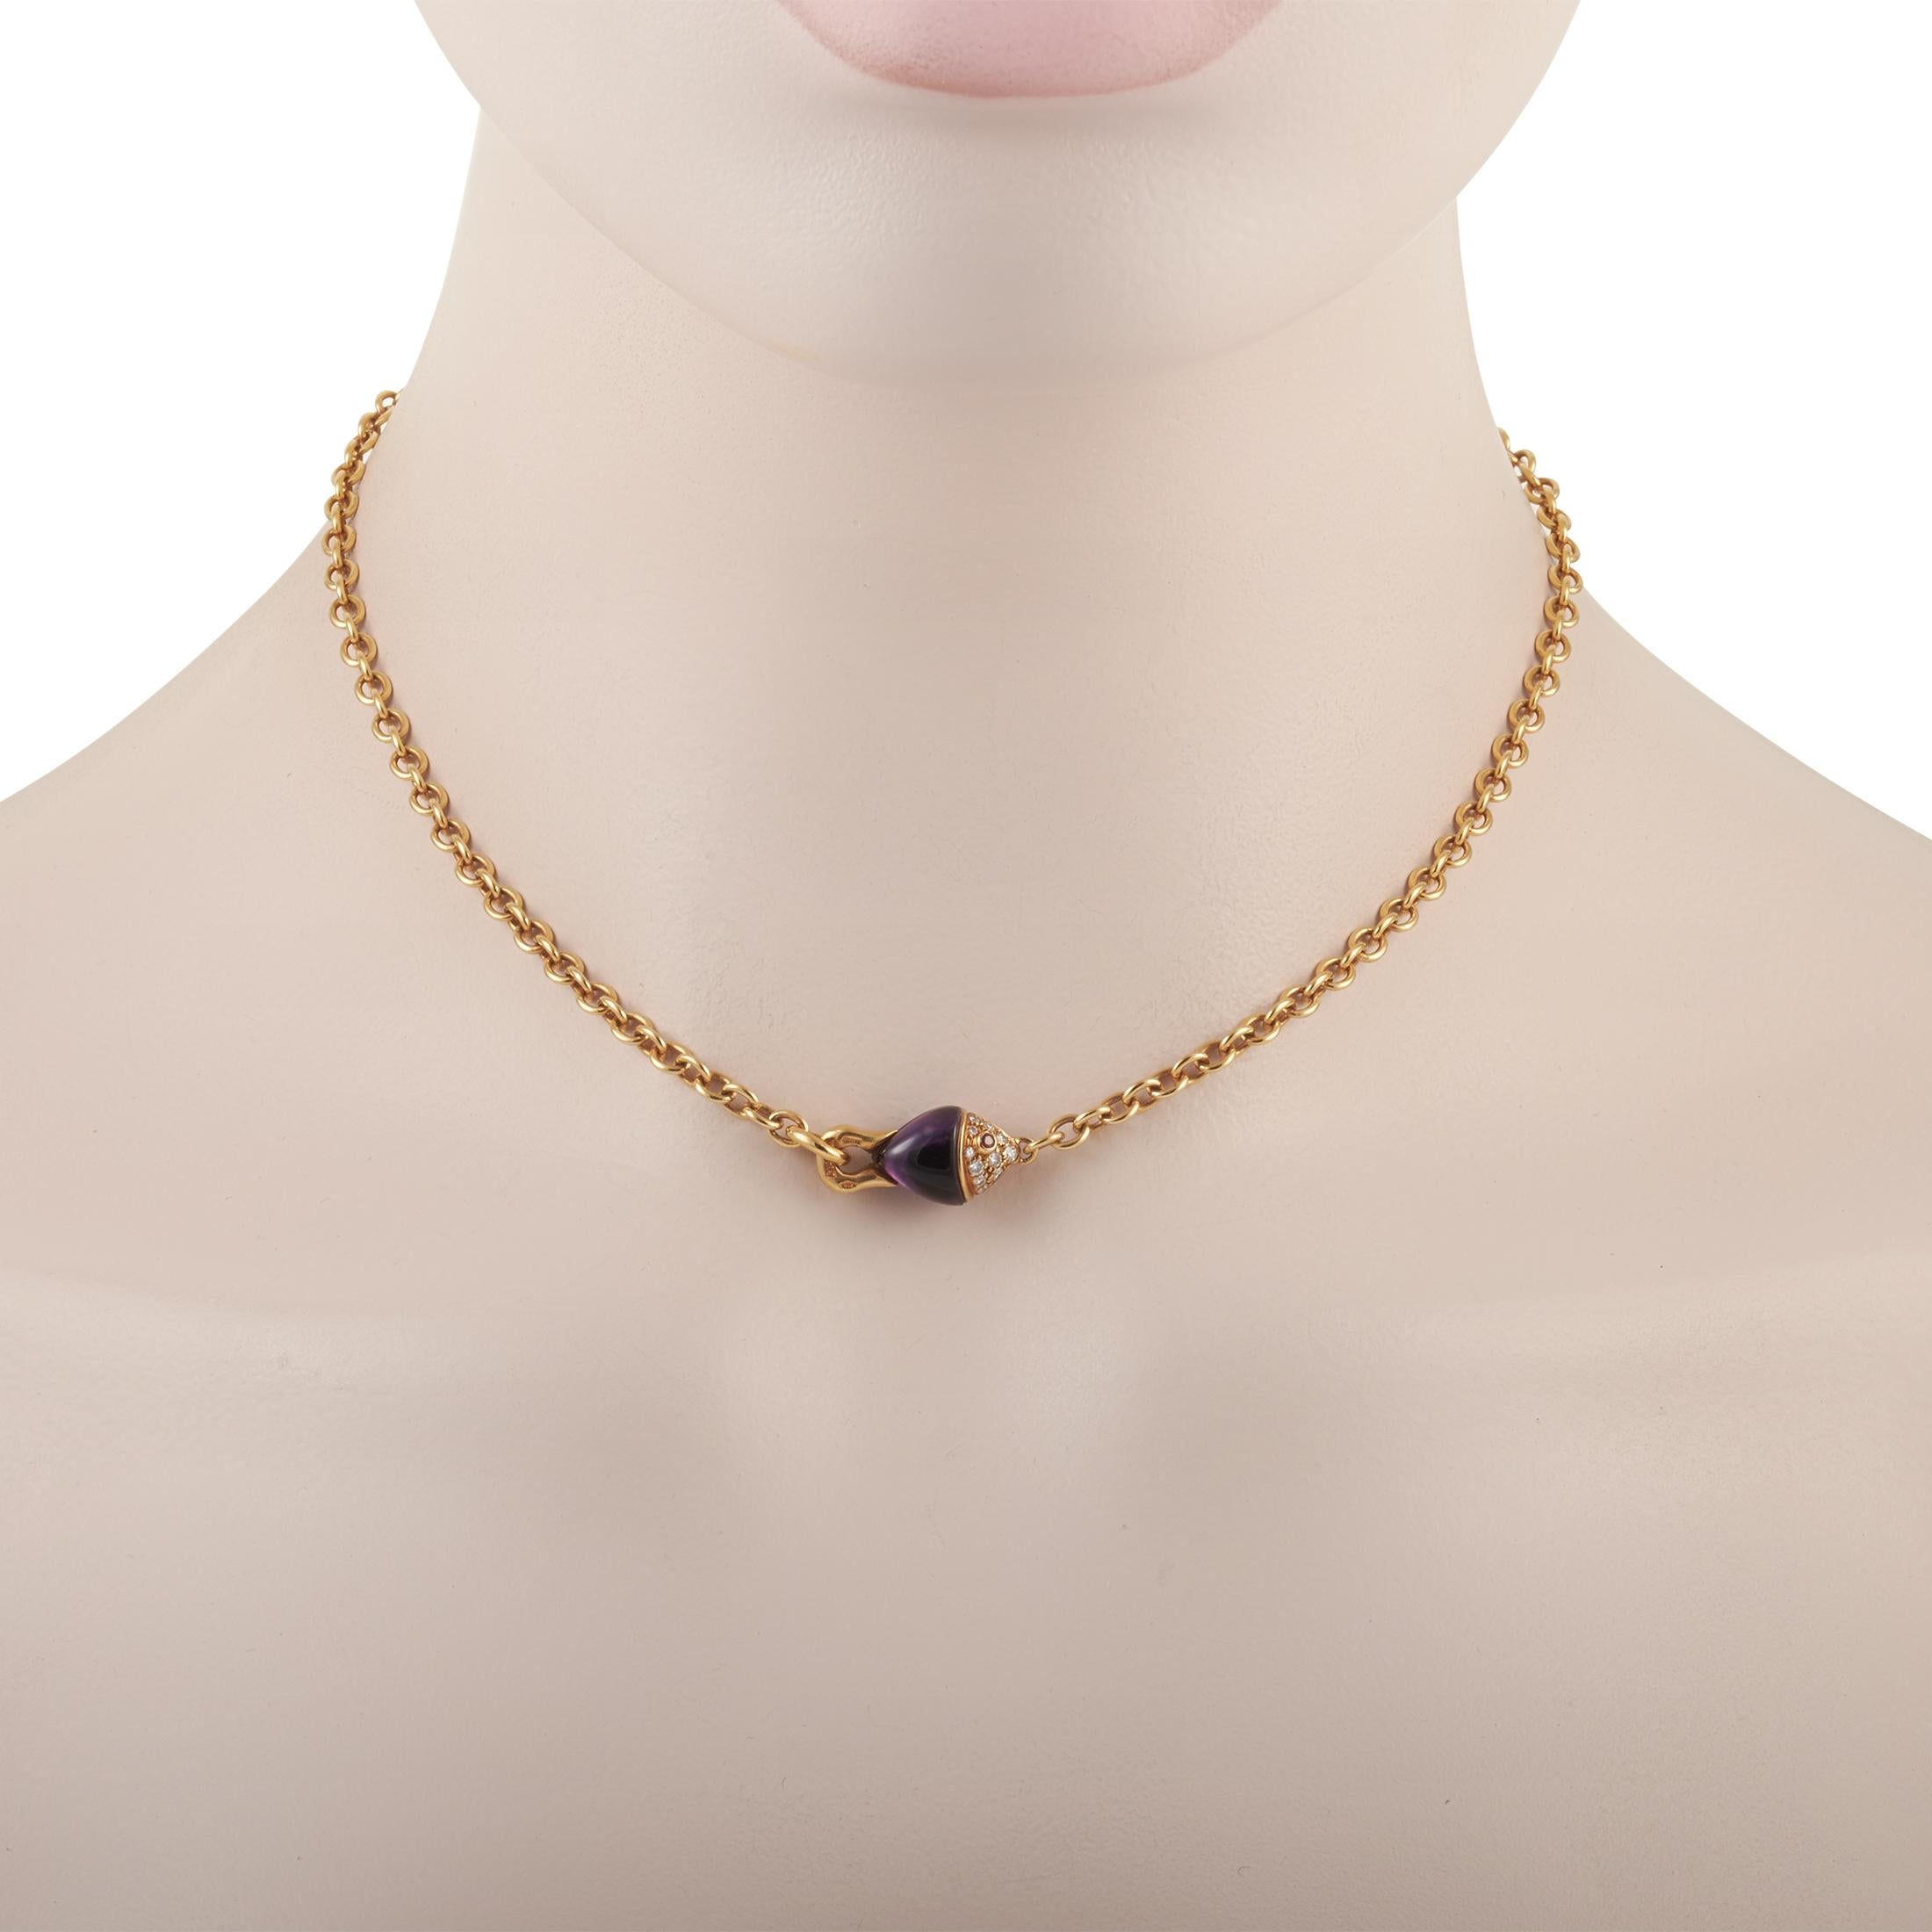 The best catch of the day. The Bvlgari 18K Yellow Gold Diamond & Amethyst Fish Necklace will give your fashion style a refreshing dip. Held by a 14-inch yellow gold chain necklace is a 0.38-inch by 0.75-inch fish-shaped pendant with two cabochon-cut